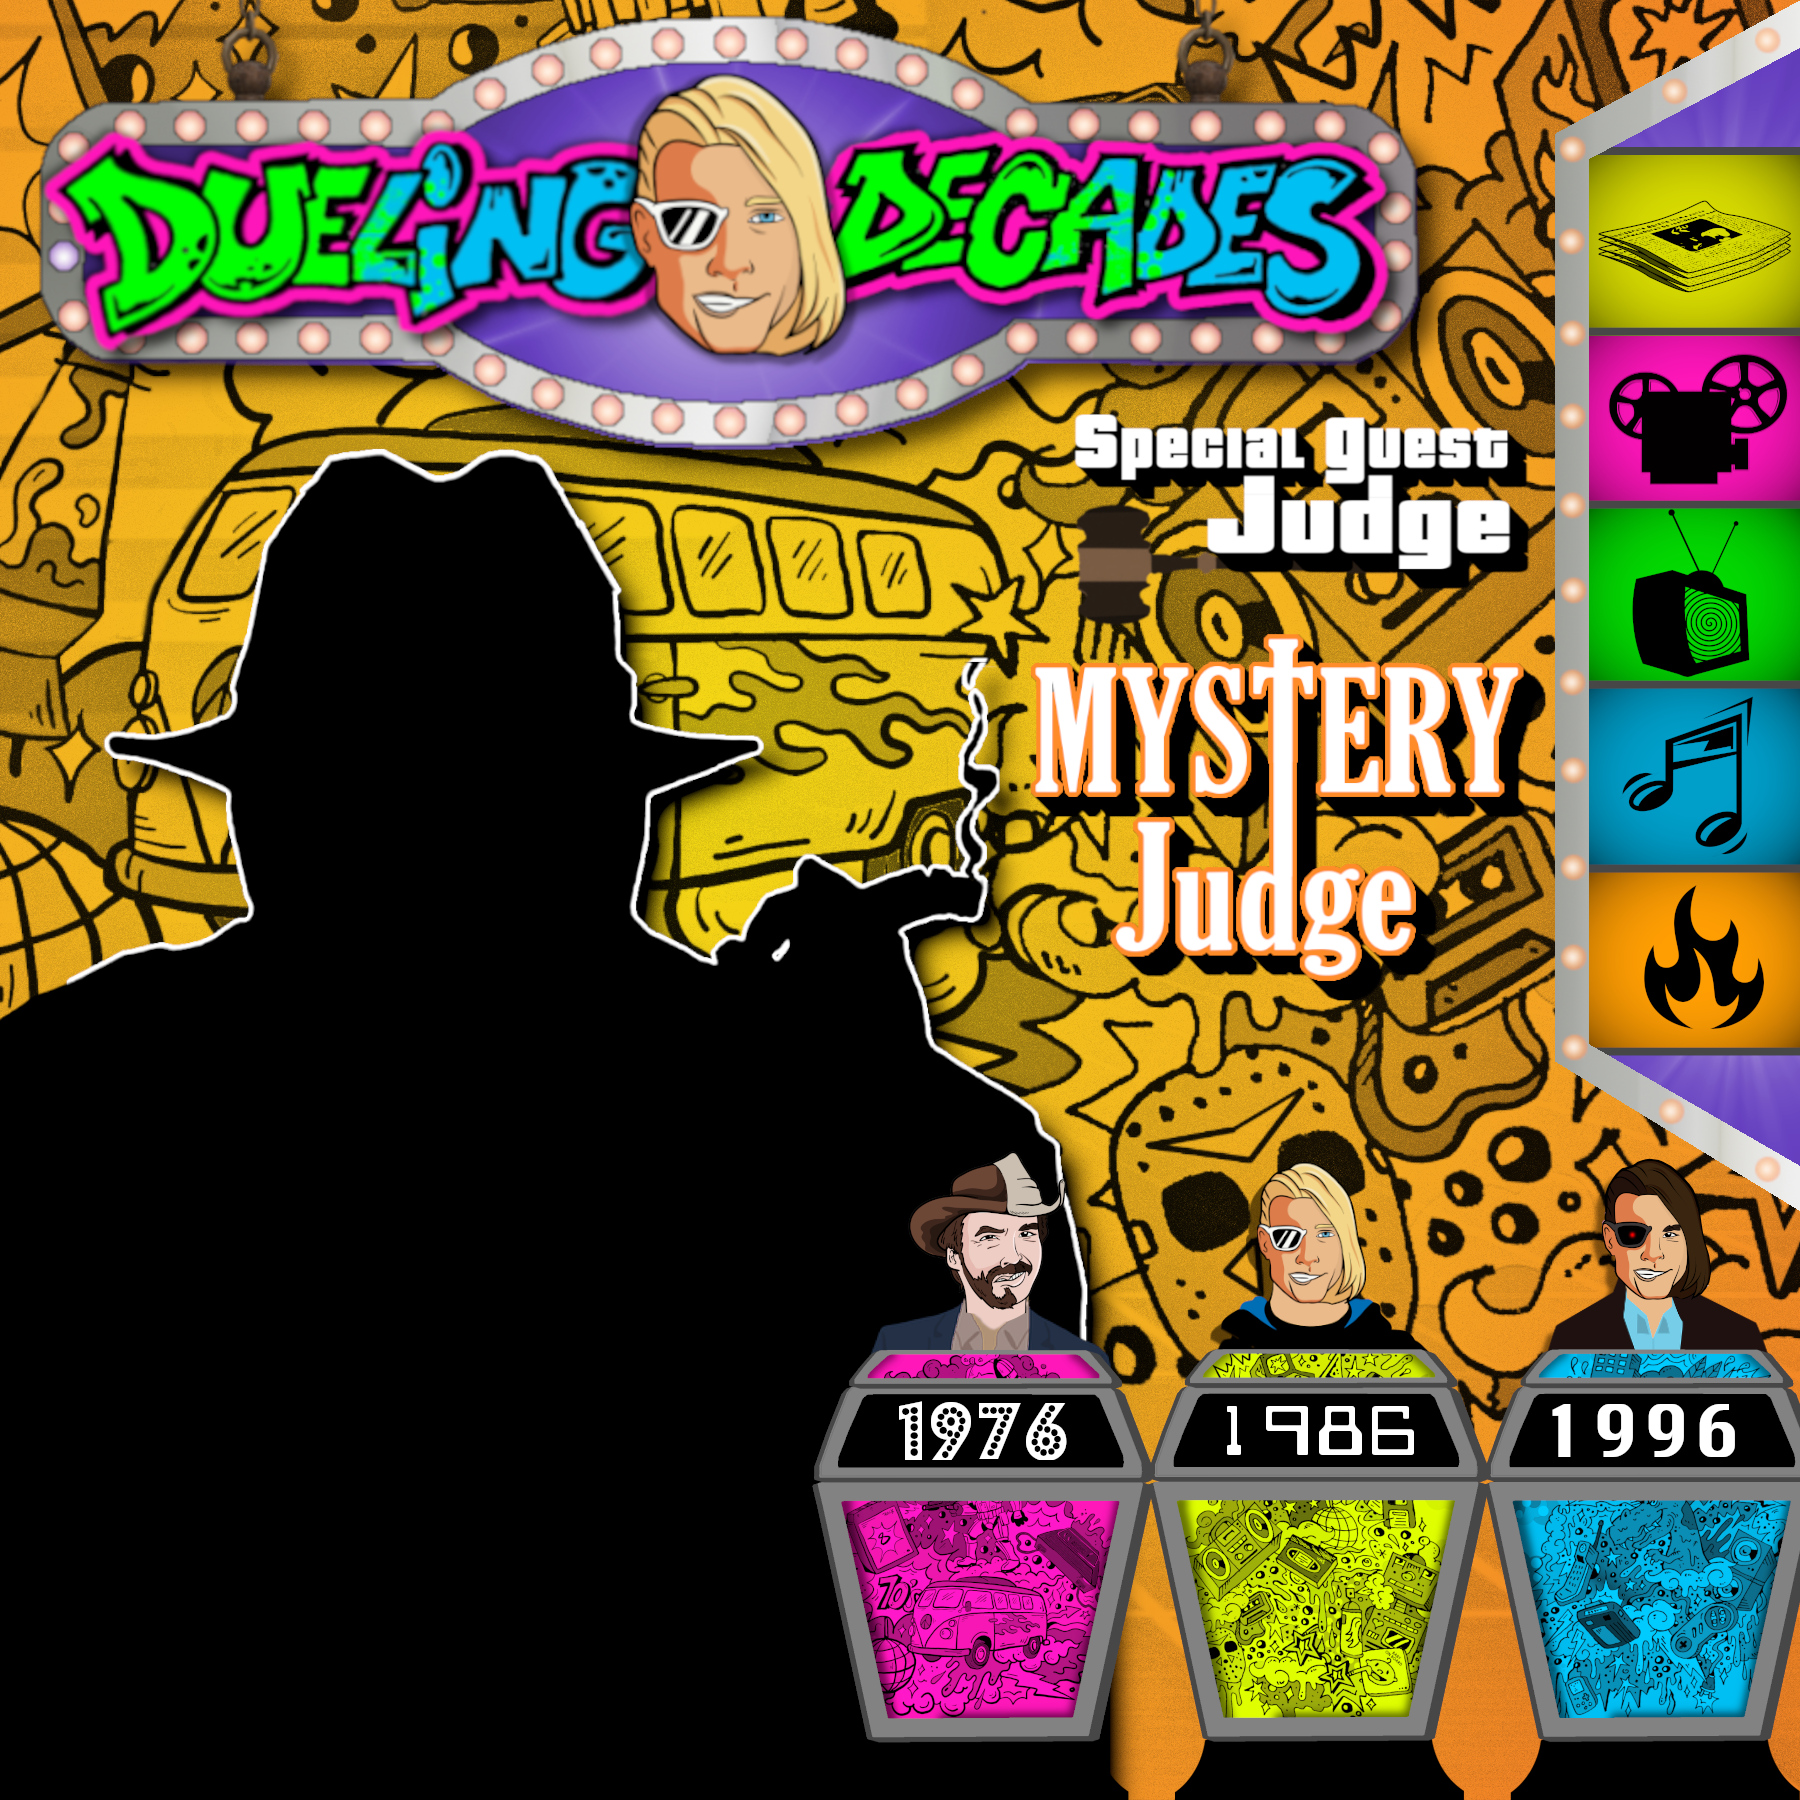 Mystery Judge “Mr. Boddy” presides over this spooky October duel between 1976, 1986 & 1996!